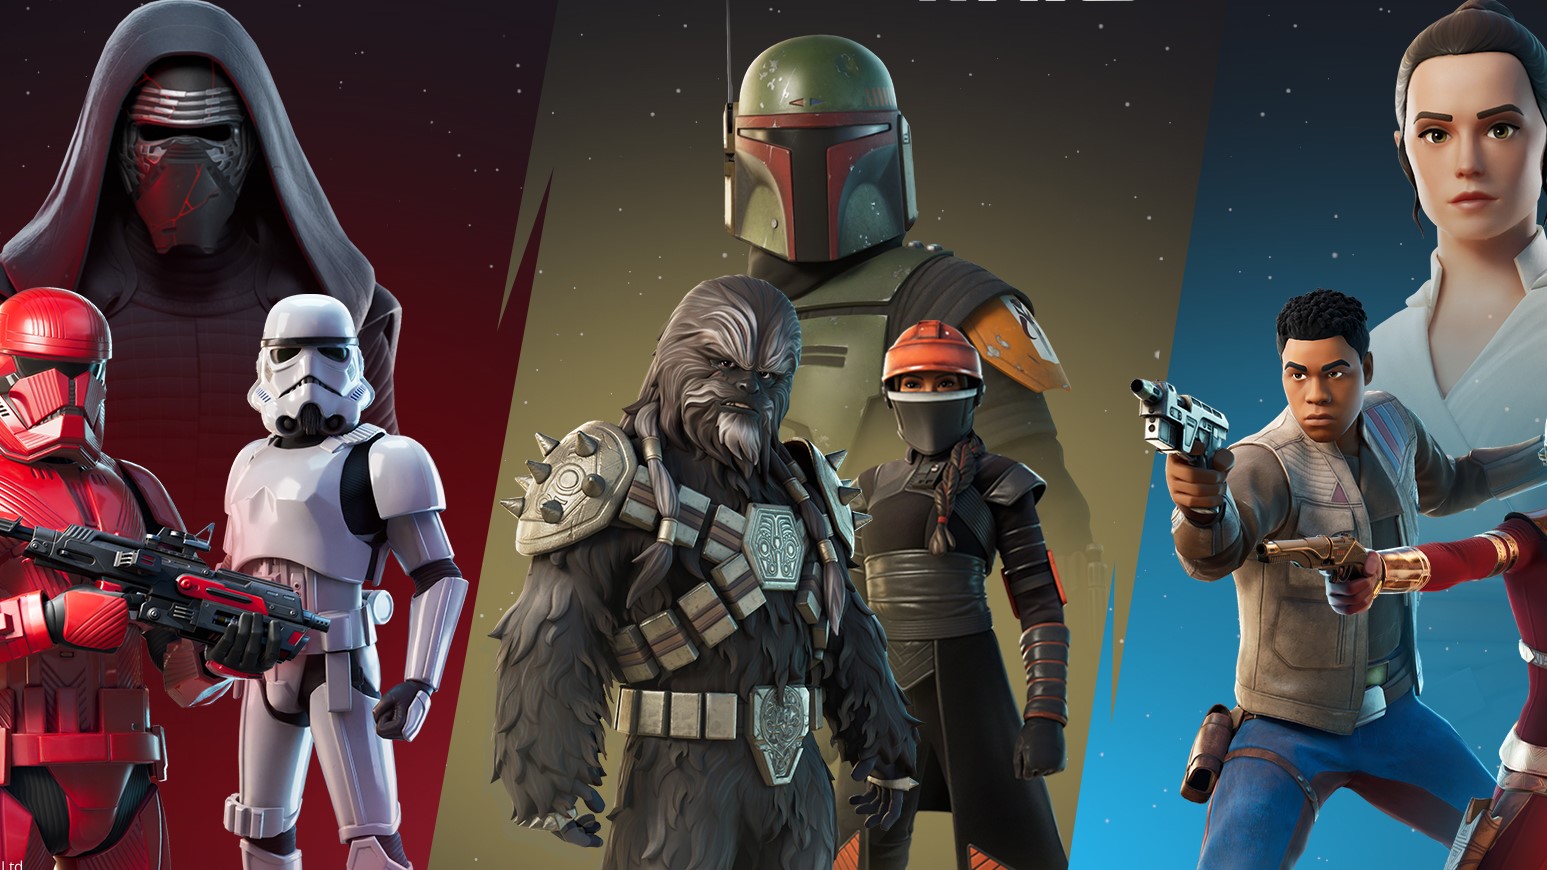 Fortnite's Star Wars collaboration outfits.